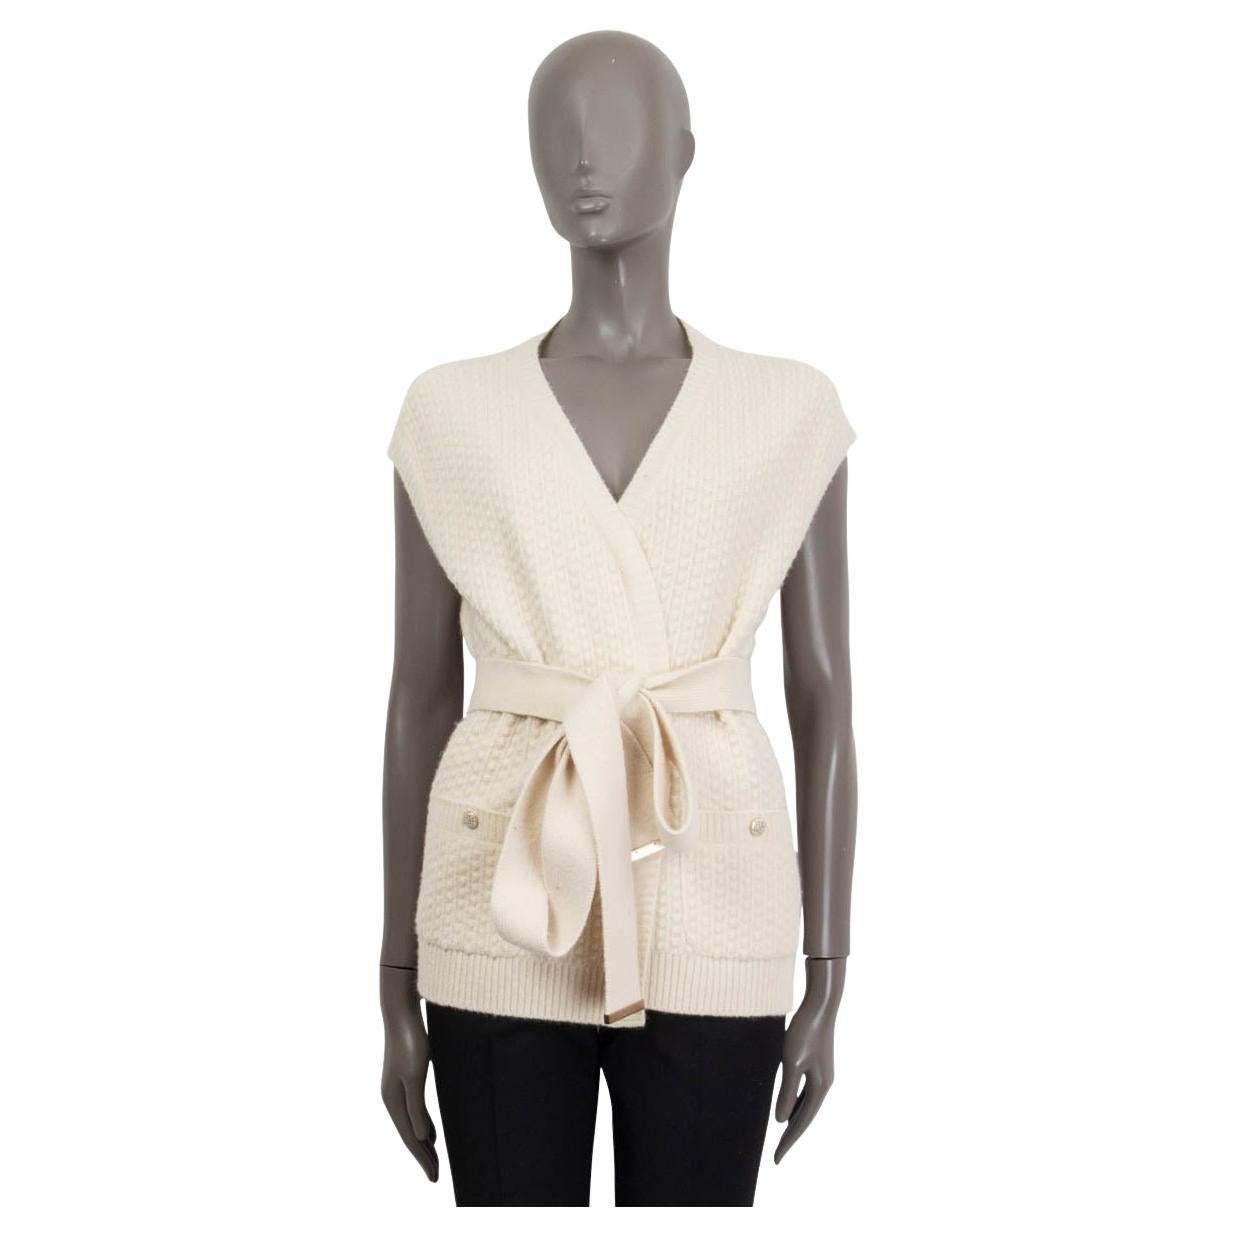 CHANEL ivory cashmere 2018 BELTED SLEEVELESS Knit Cardigan Sweater 40 M